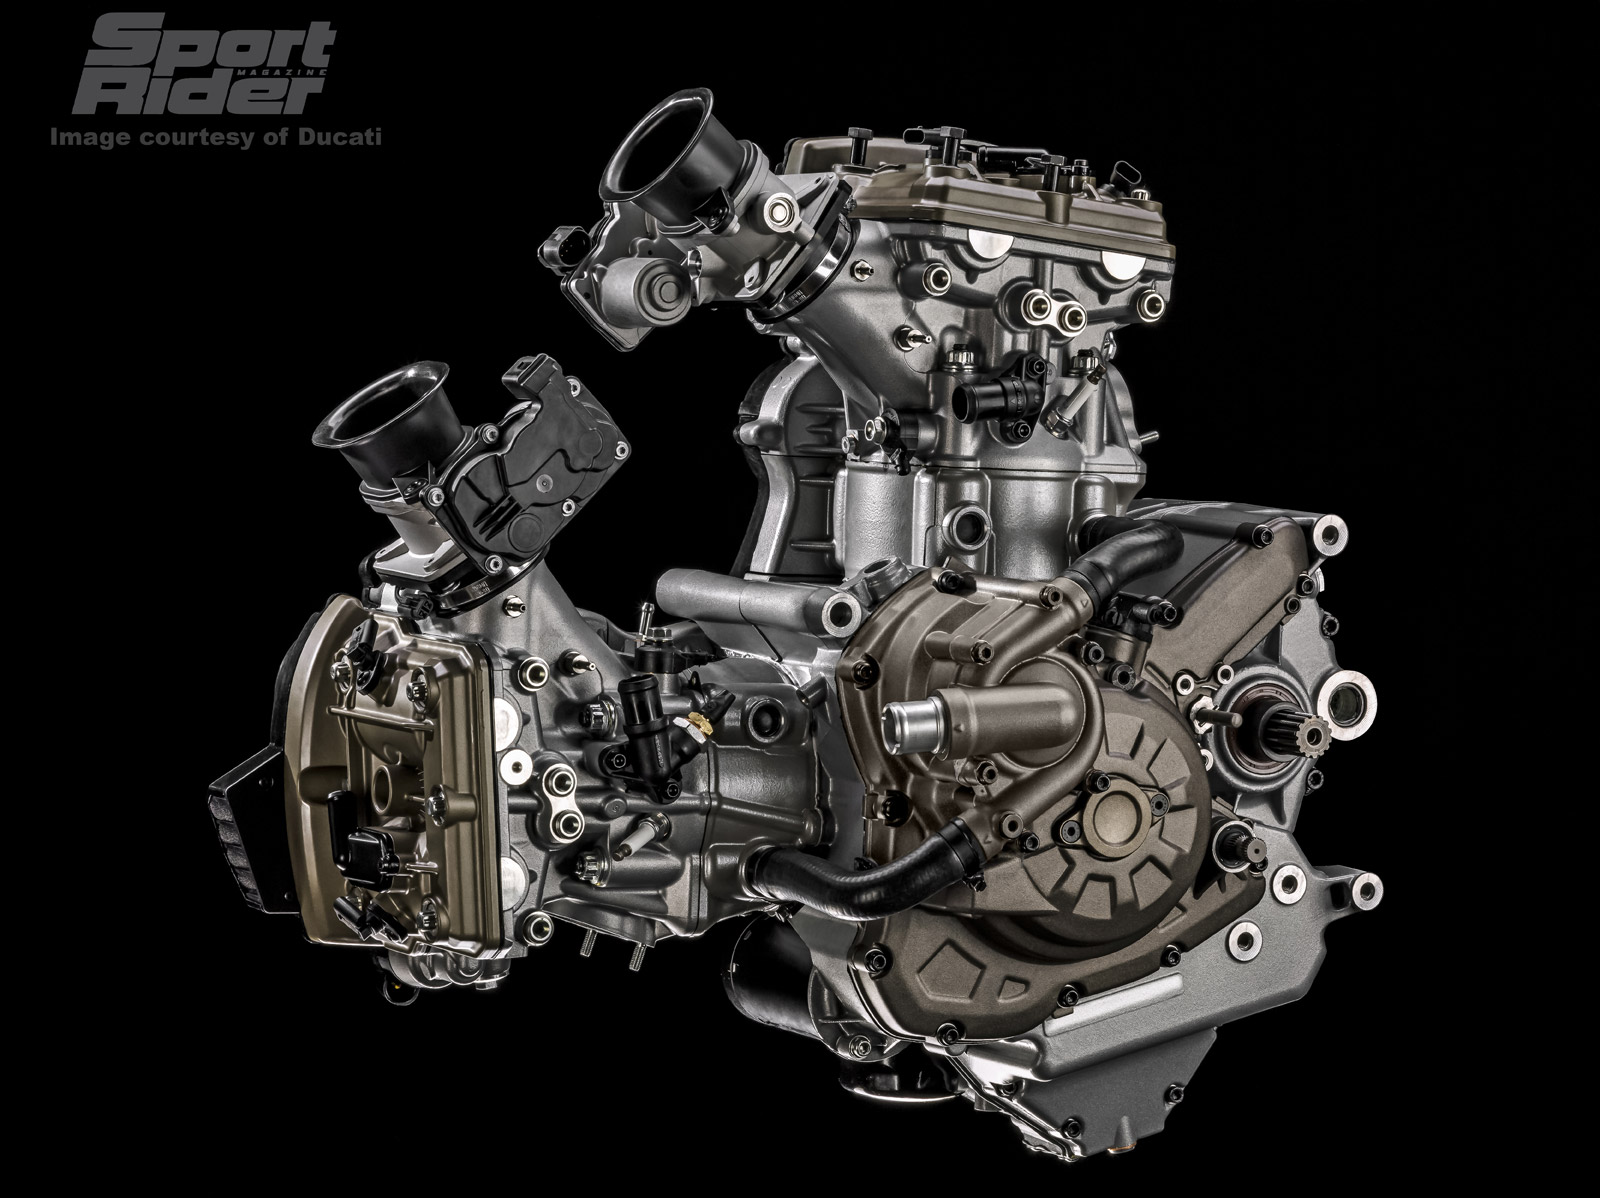 what is the significance of the bf44 engine in the dvt engine diagram